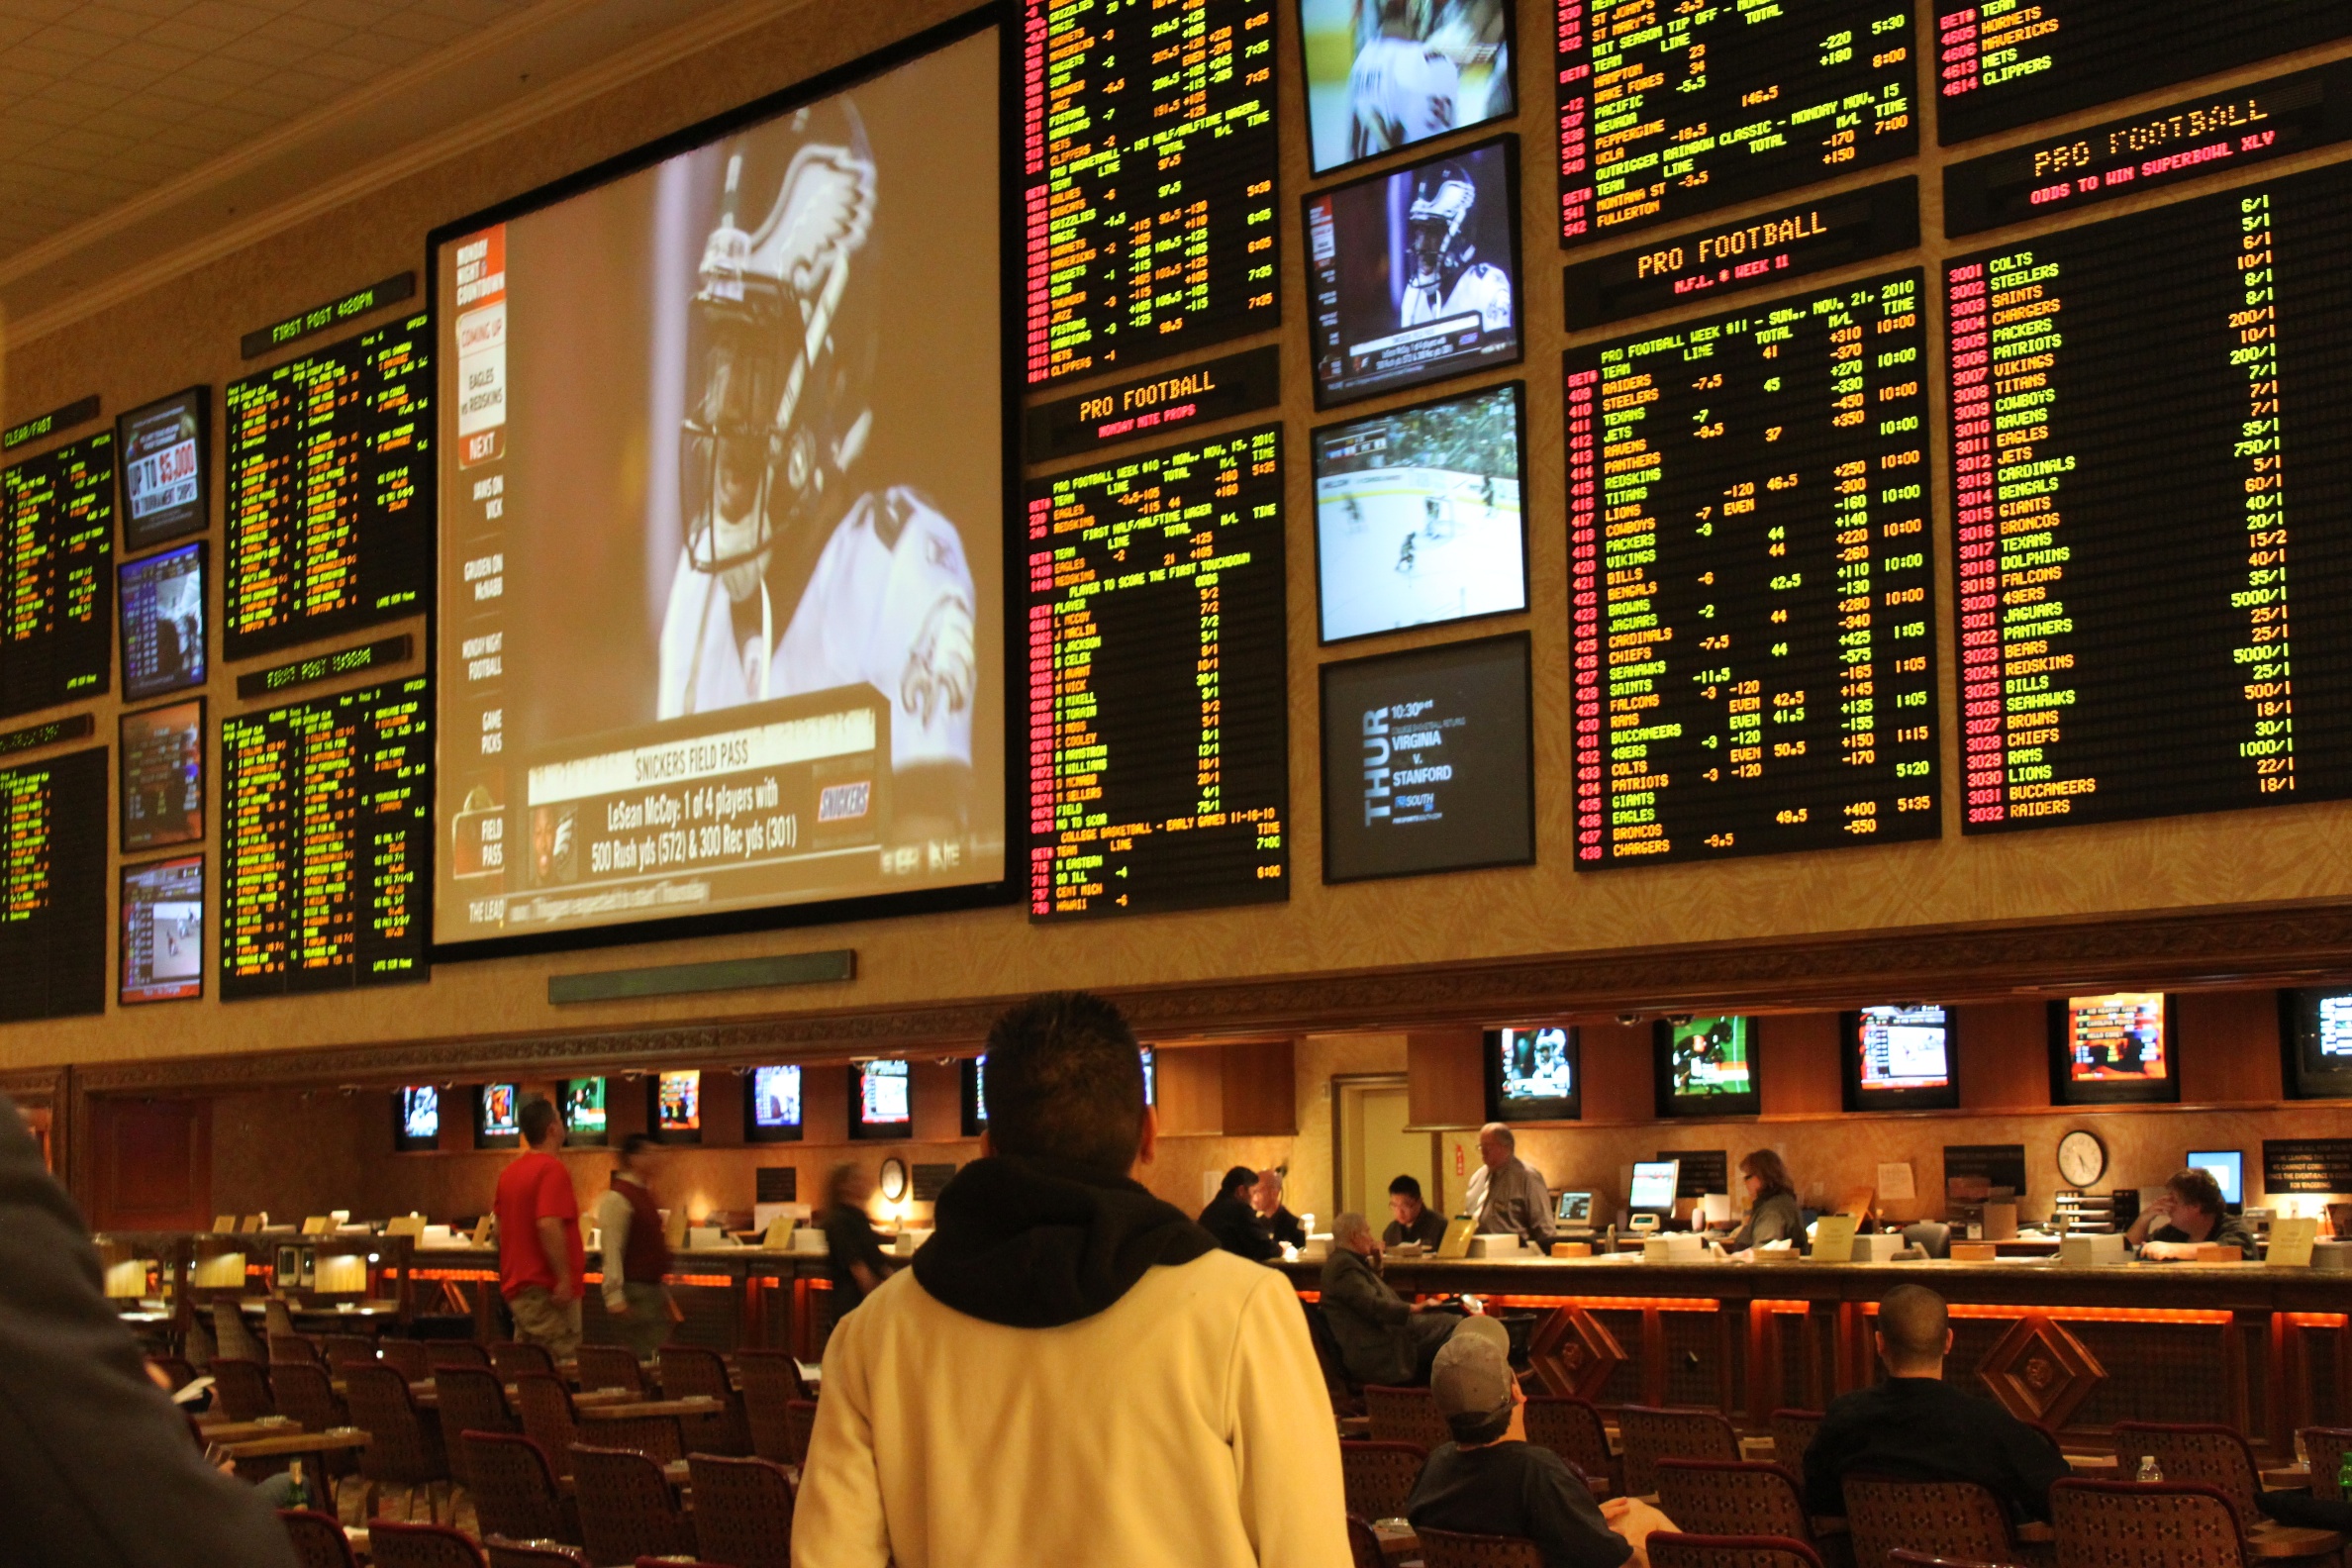 New York sports betting now includes wagering on golf matches online